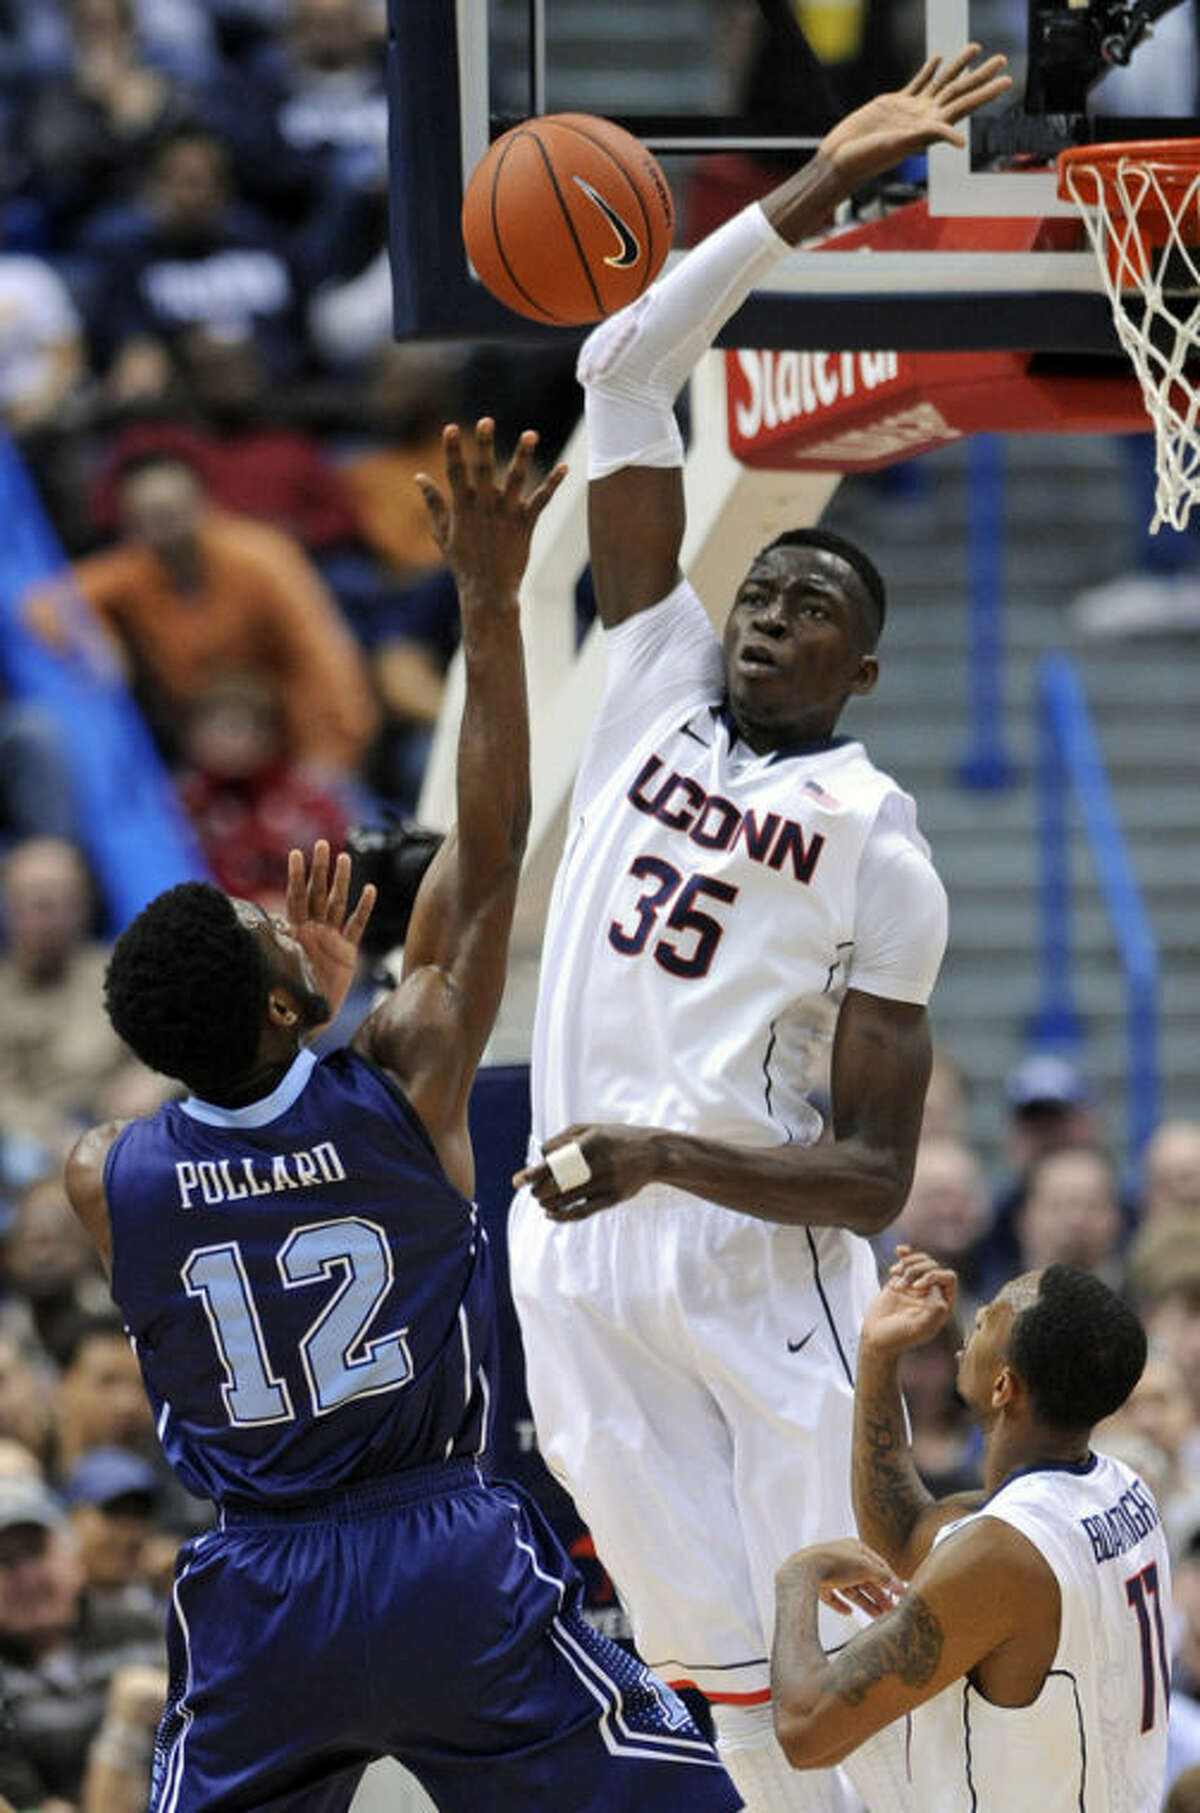 Maine's Xavier Pollard (12) tries to shoot over Connecticut's Amida Brimah (35) during the first half of an NCAA college basketball game, in Hartford, Conn., on Friday, Dec. 6, 2013. (AP Photo/Fred Beckham)